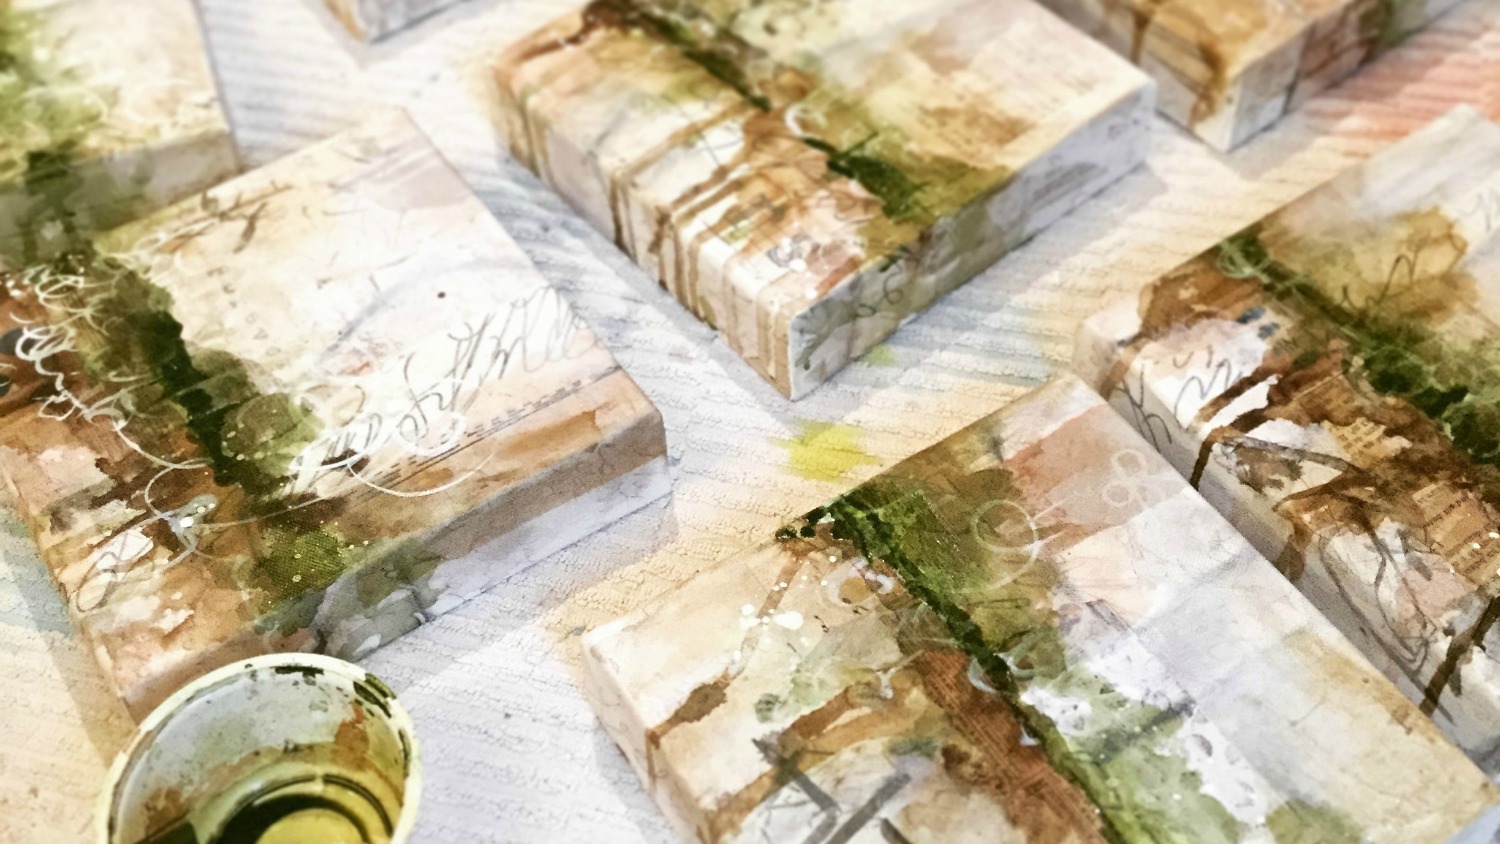 Getting Started in Encaustic Painting 